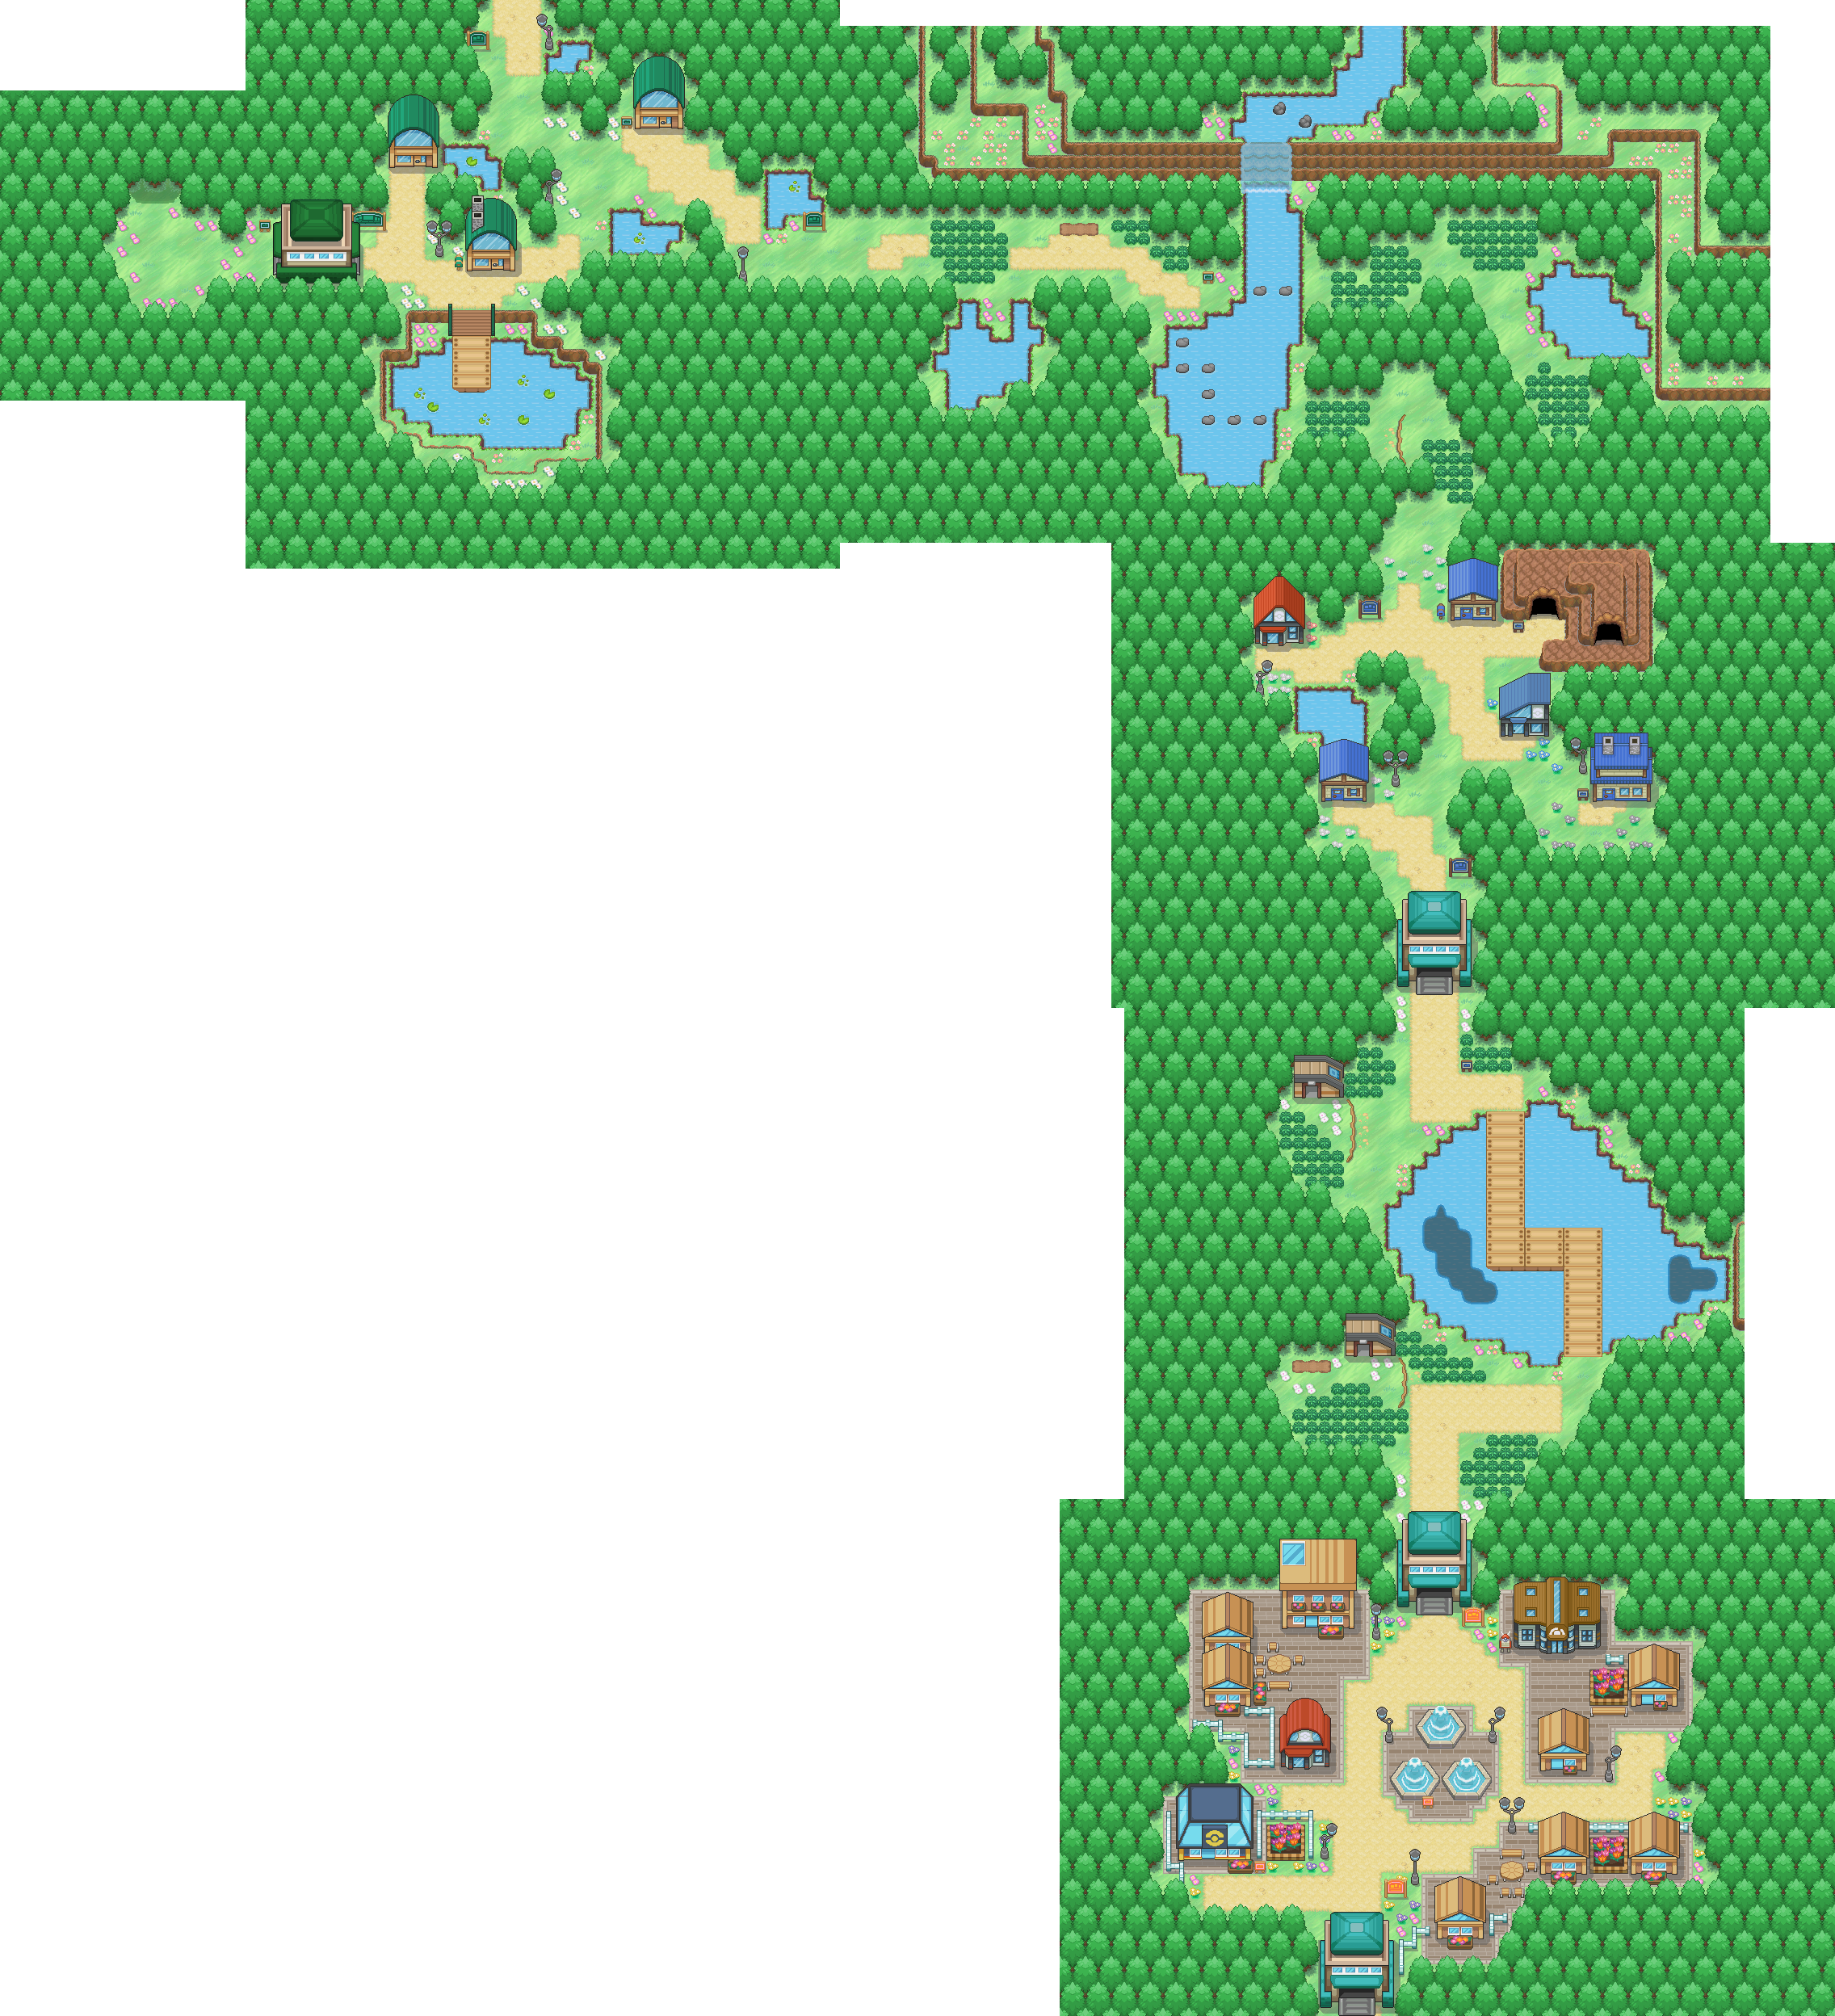 zela_region_map__part_1__by_rayd12smitty-d8tetcv.png